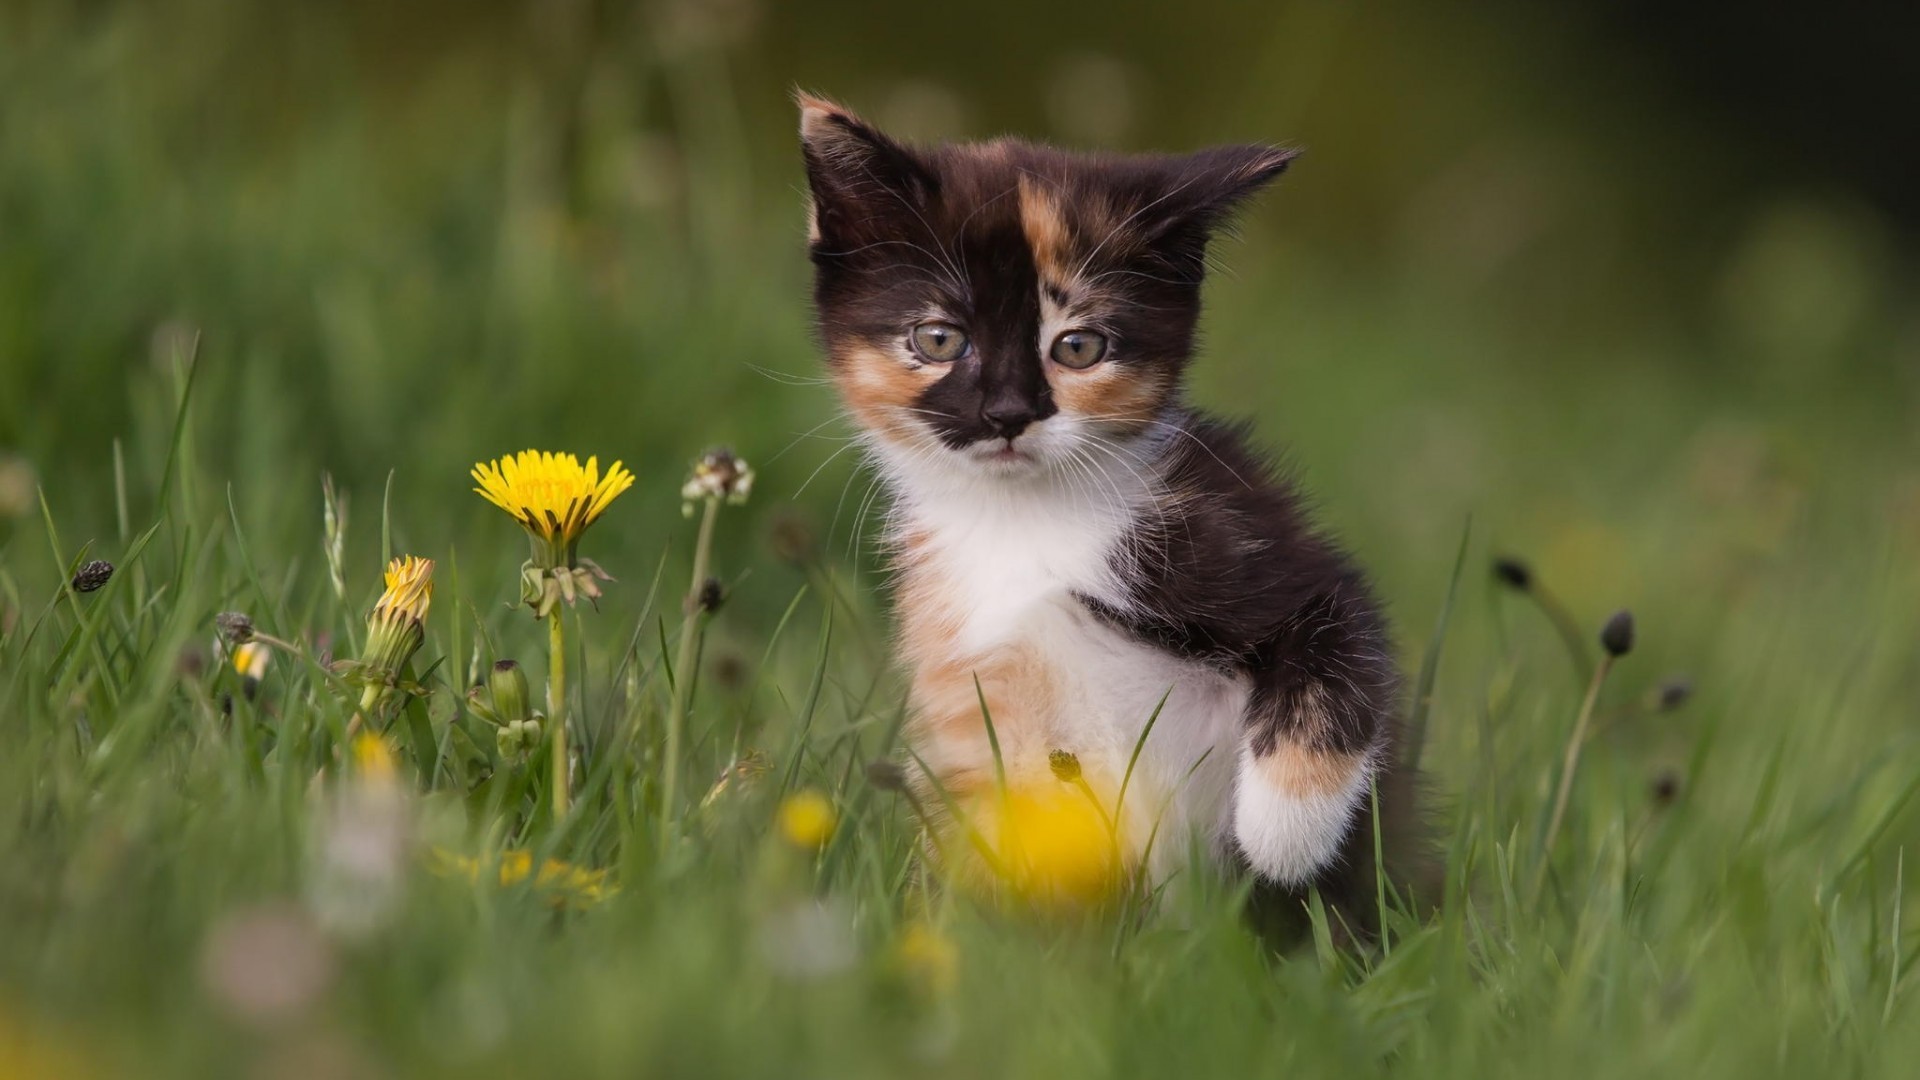 General 1920x1080 kittens cats animals baby animals yellow flowers mammals plants outdoors